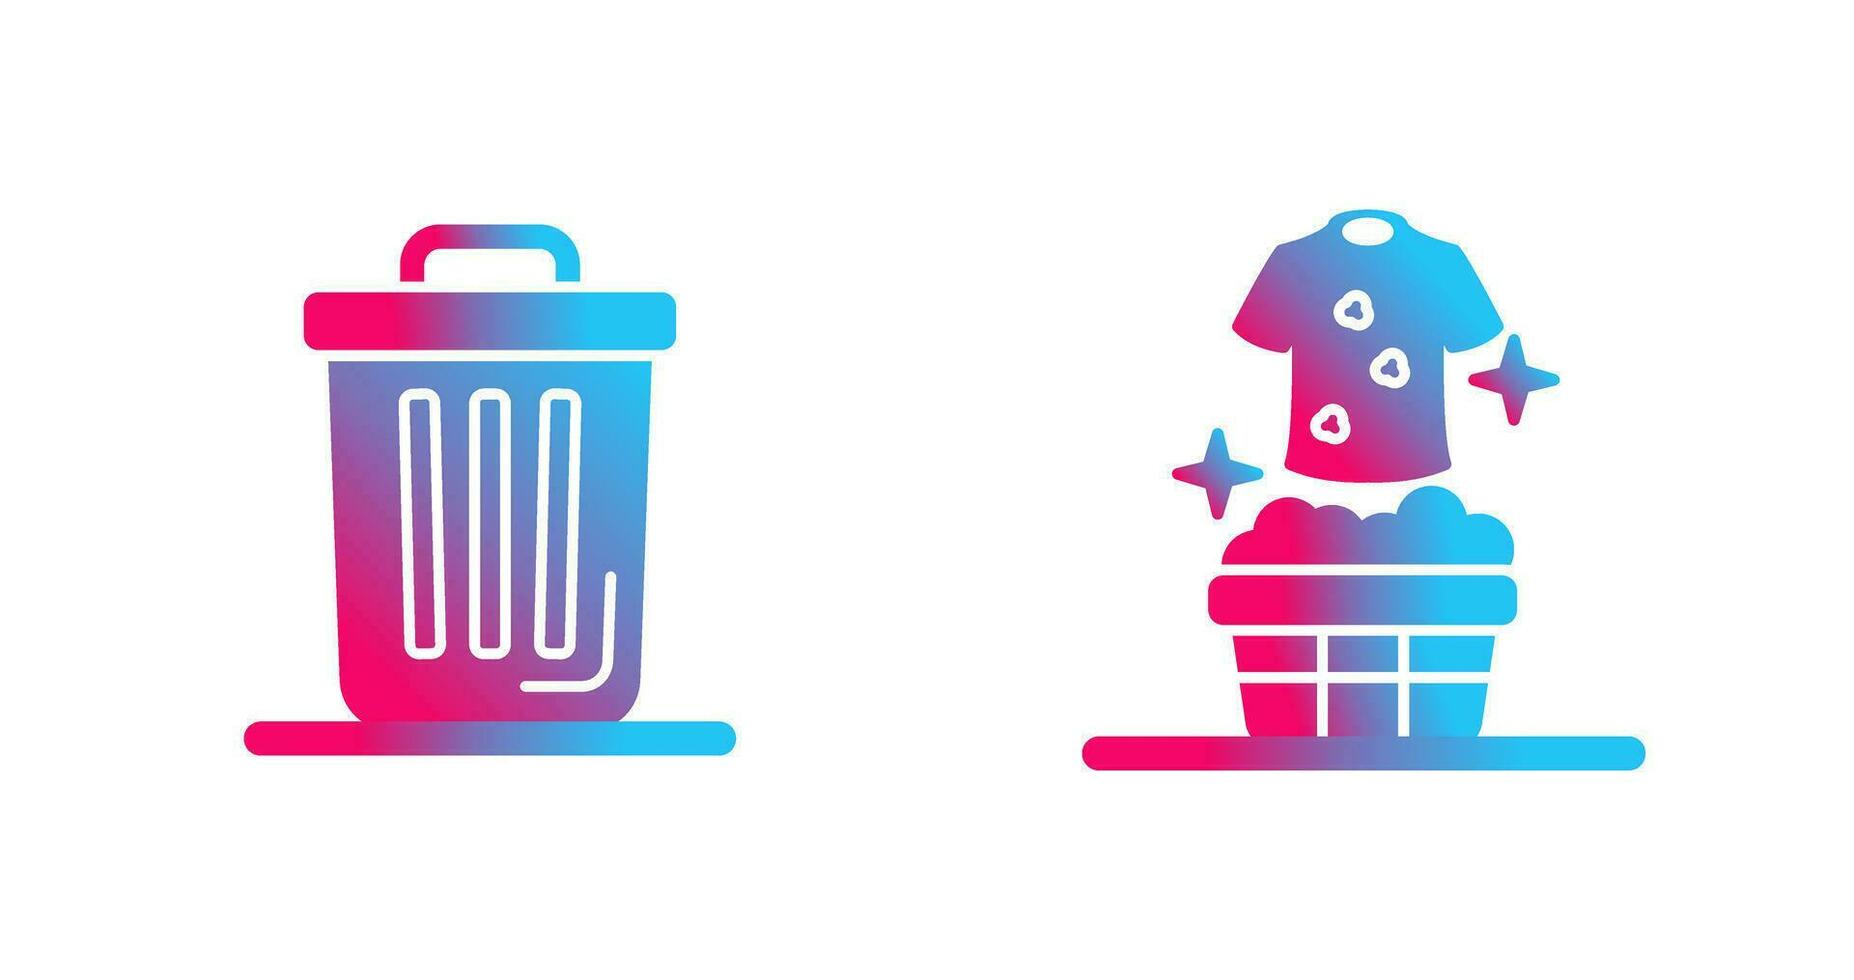 Trash Can and Laundary Icon vector